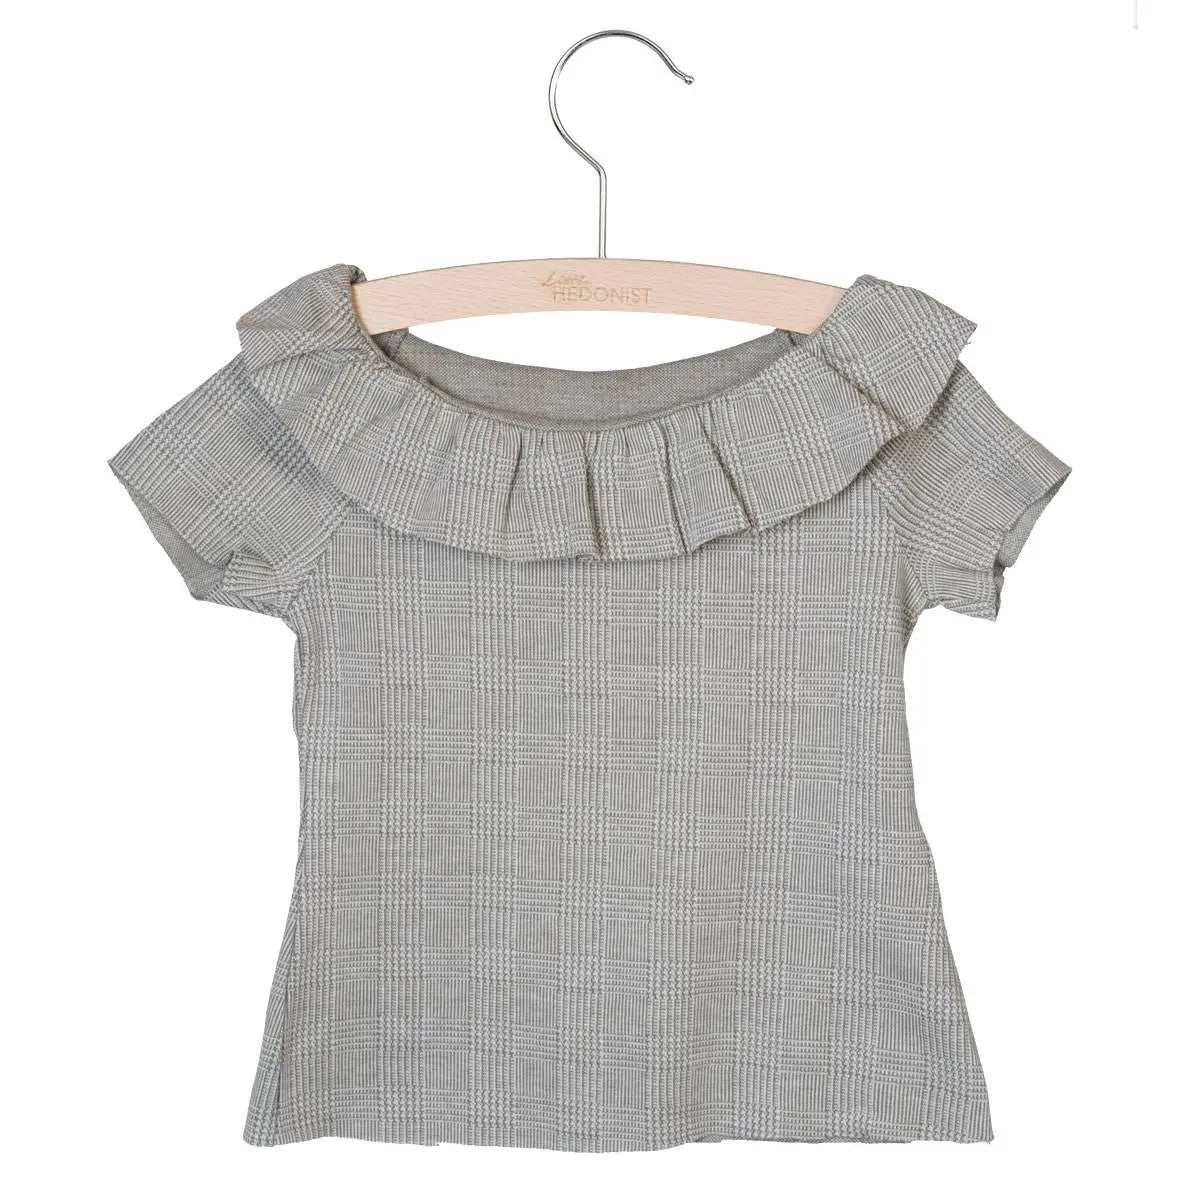 Little Hedonist Jacquard Beige organic cotton short sleeve shirt with a ruffled neck.